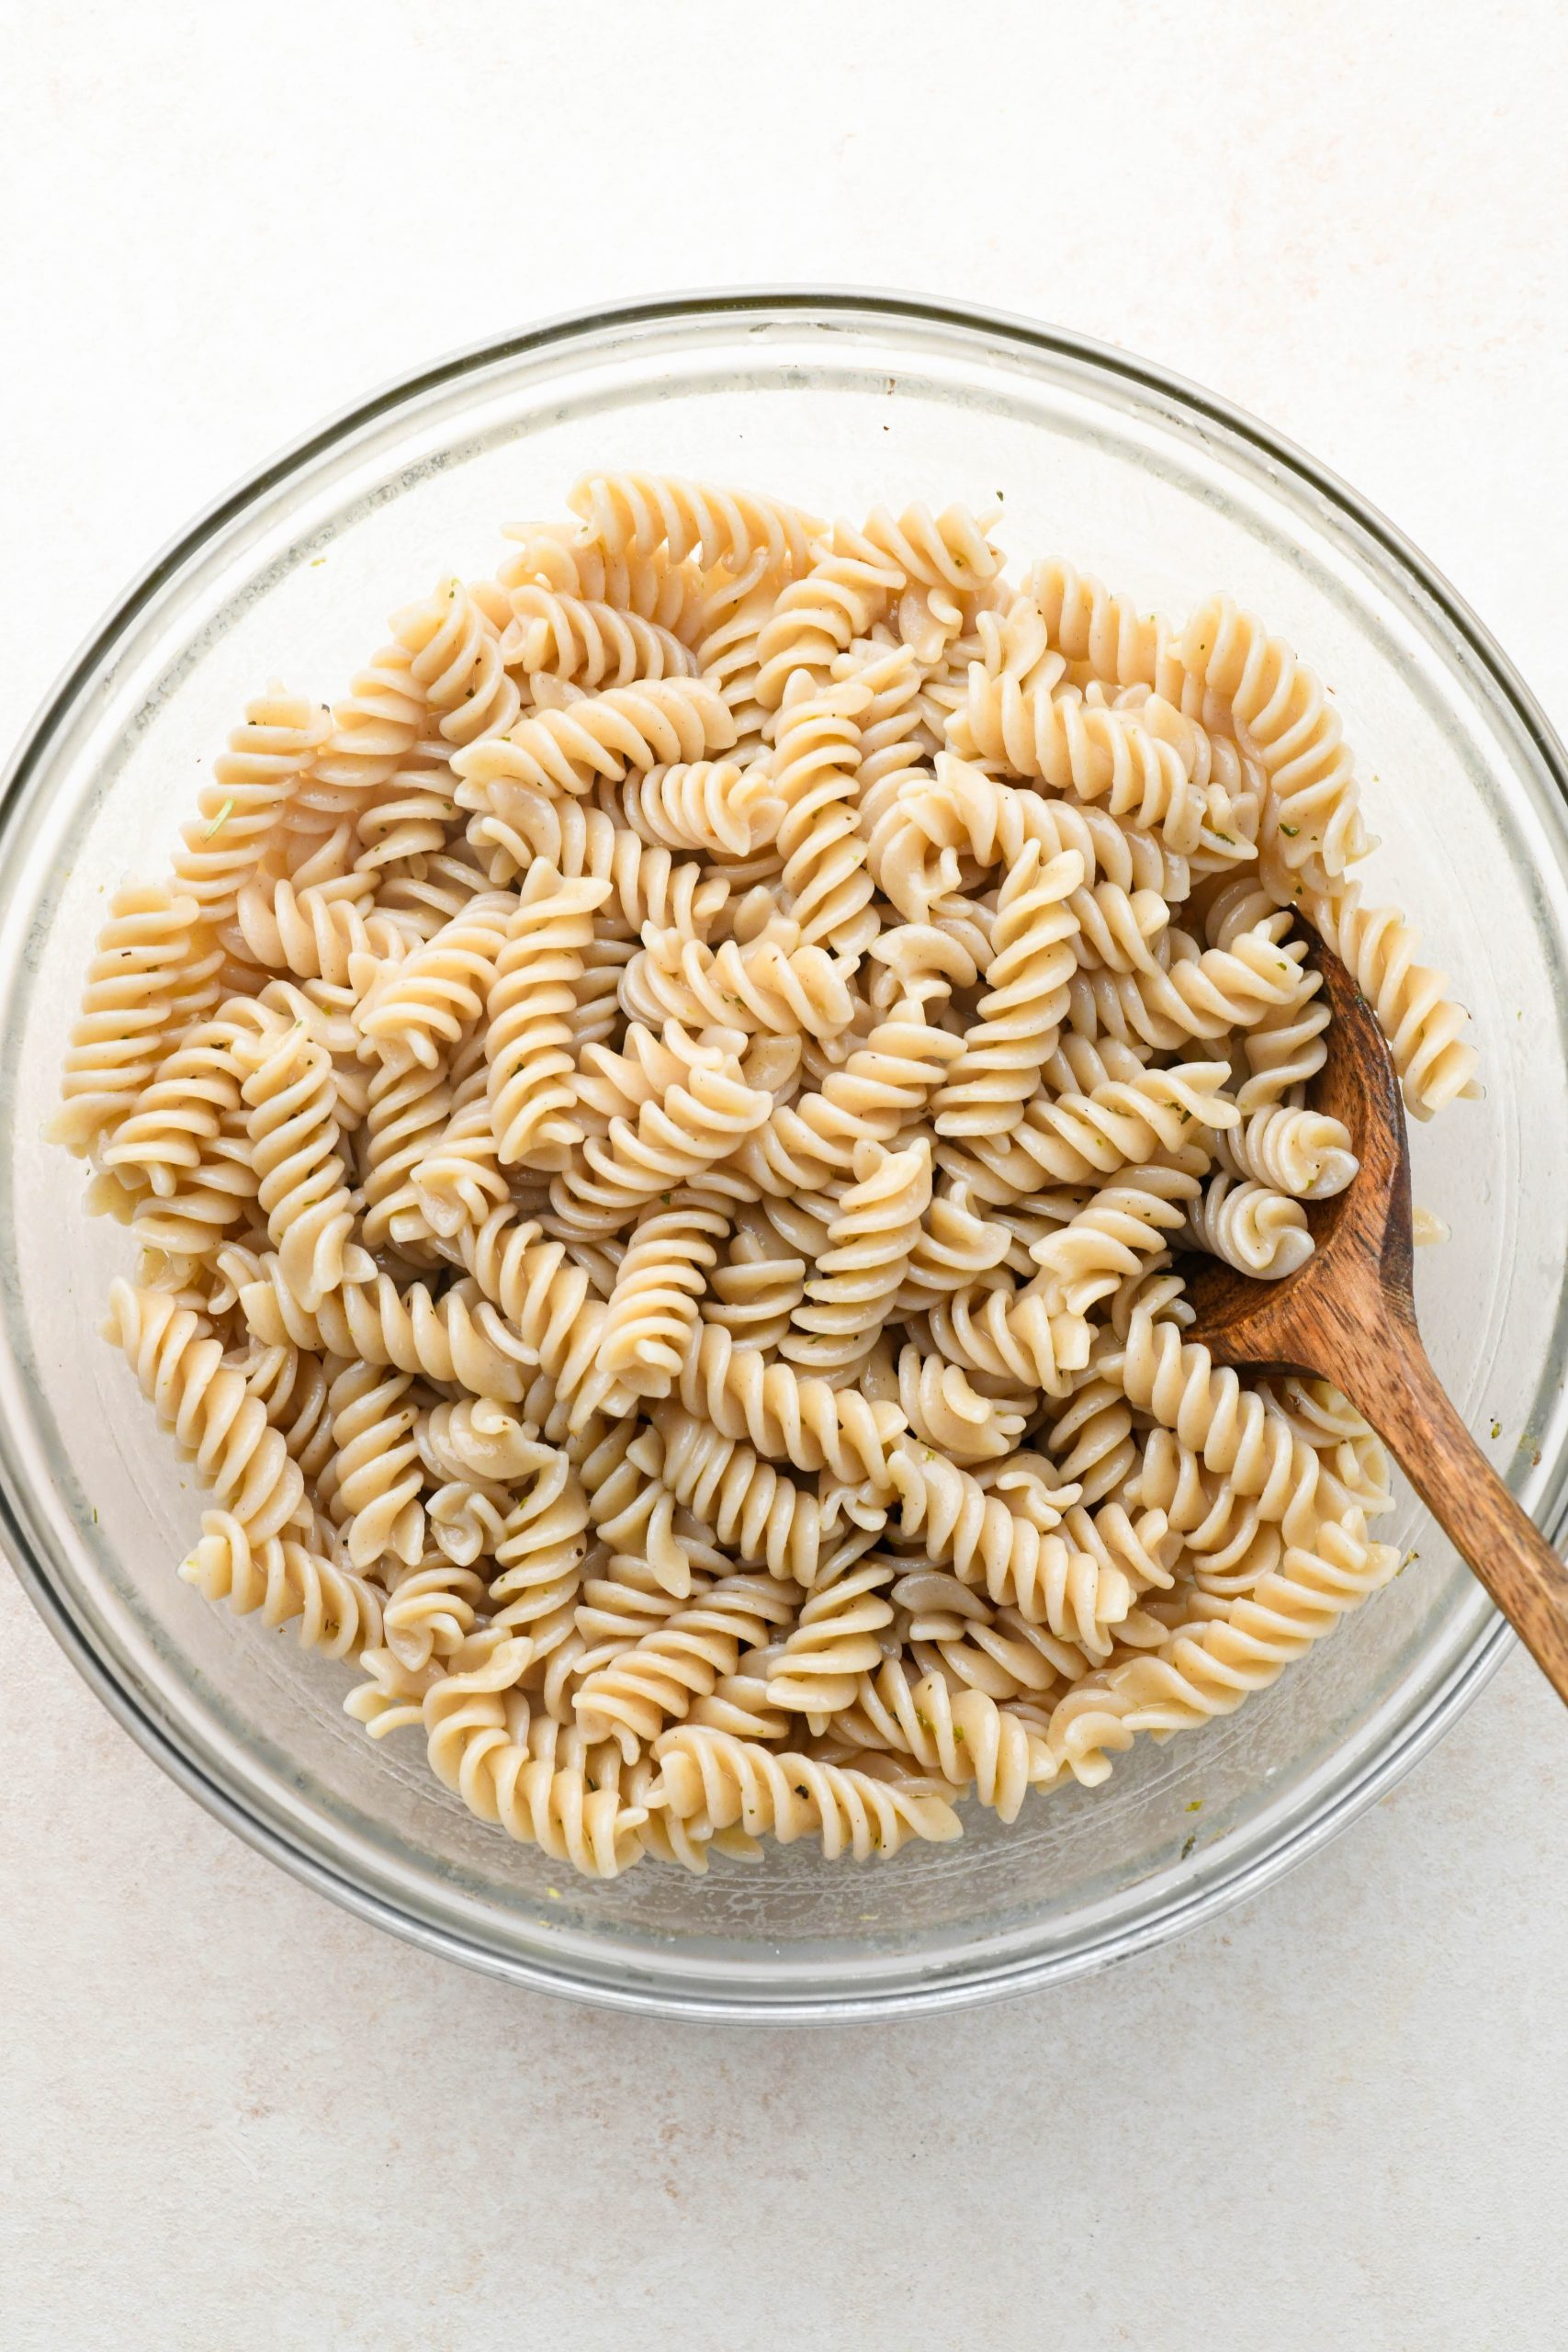 How to make Easy Gluten Free Italian Pasta Salad: Cooked fusilli pasta in a large glass bowl, tossed with some of the dressing.